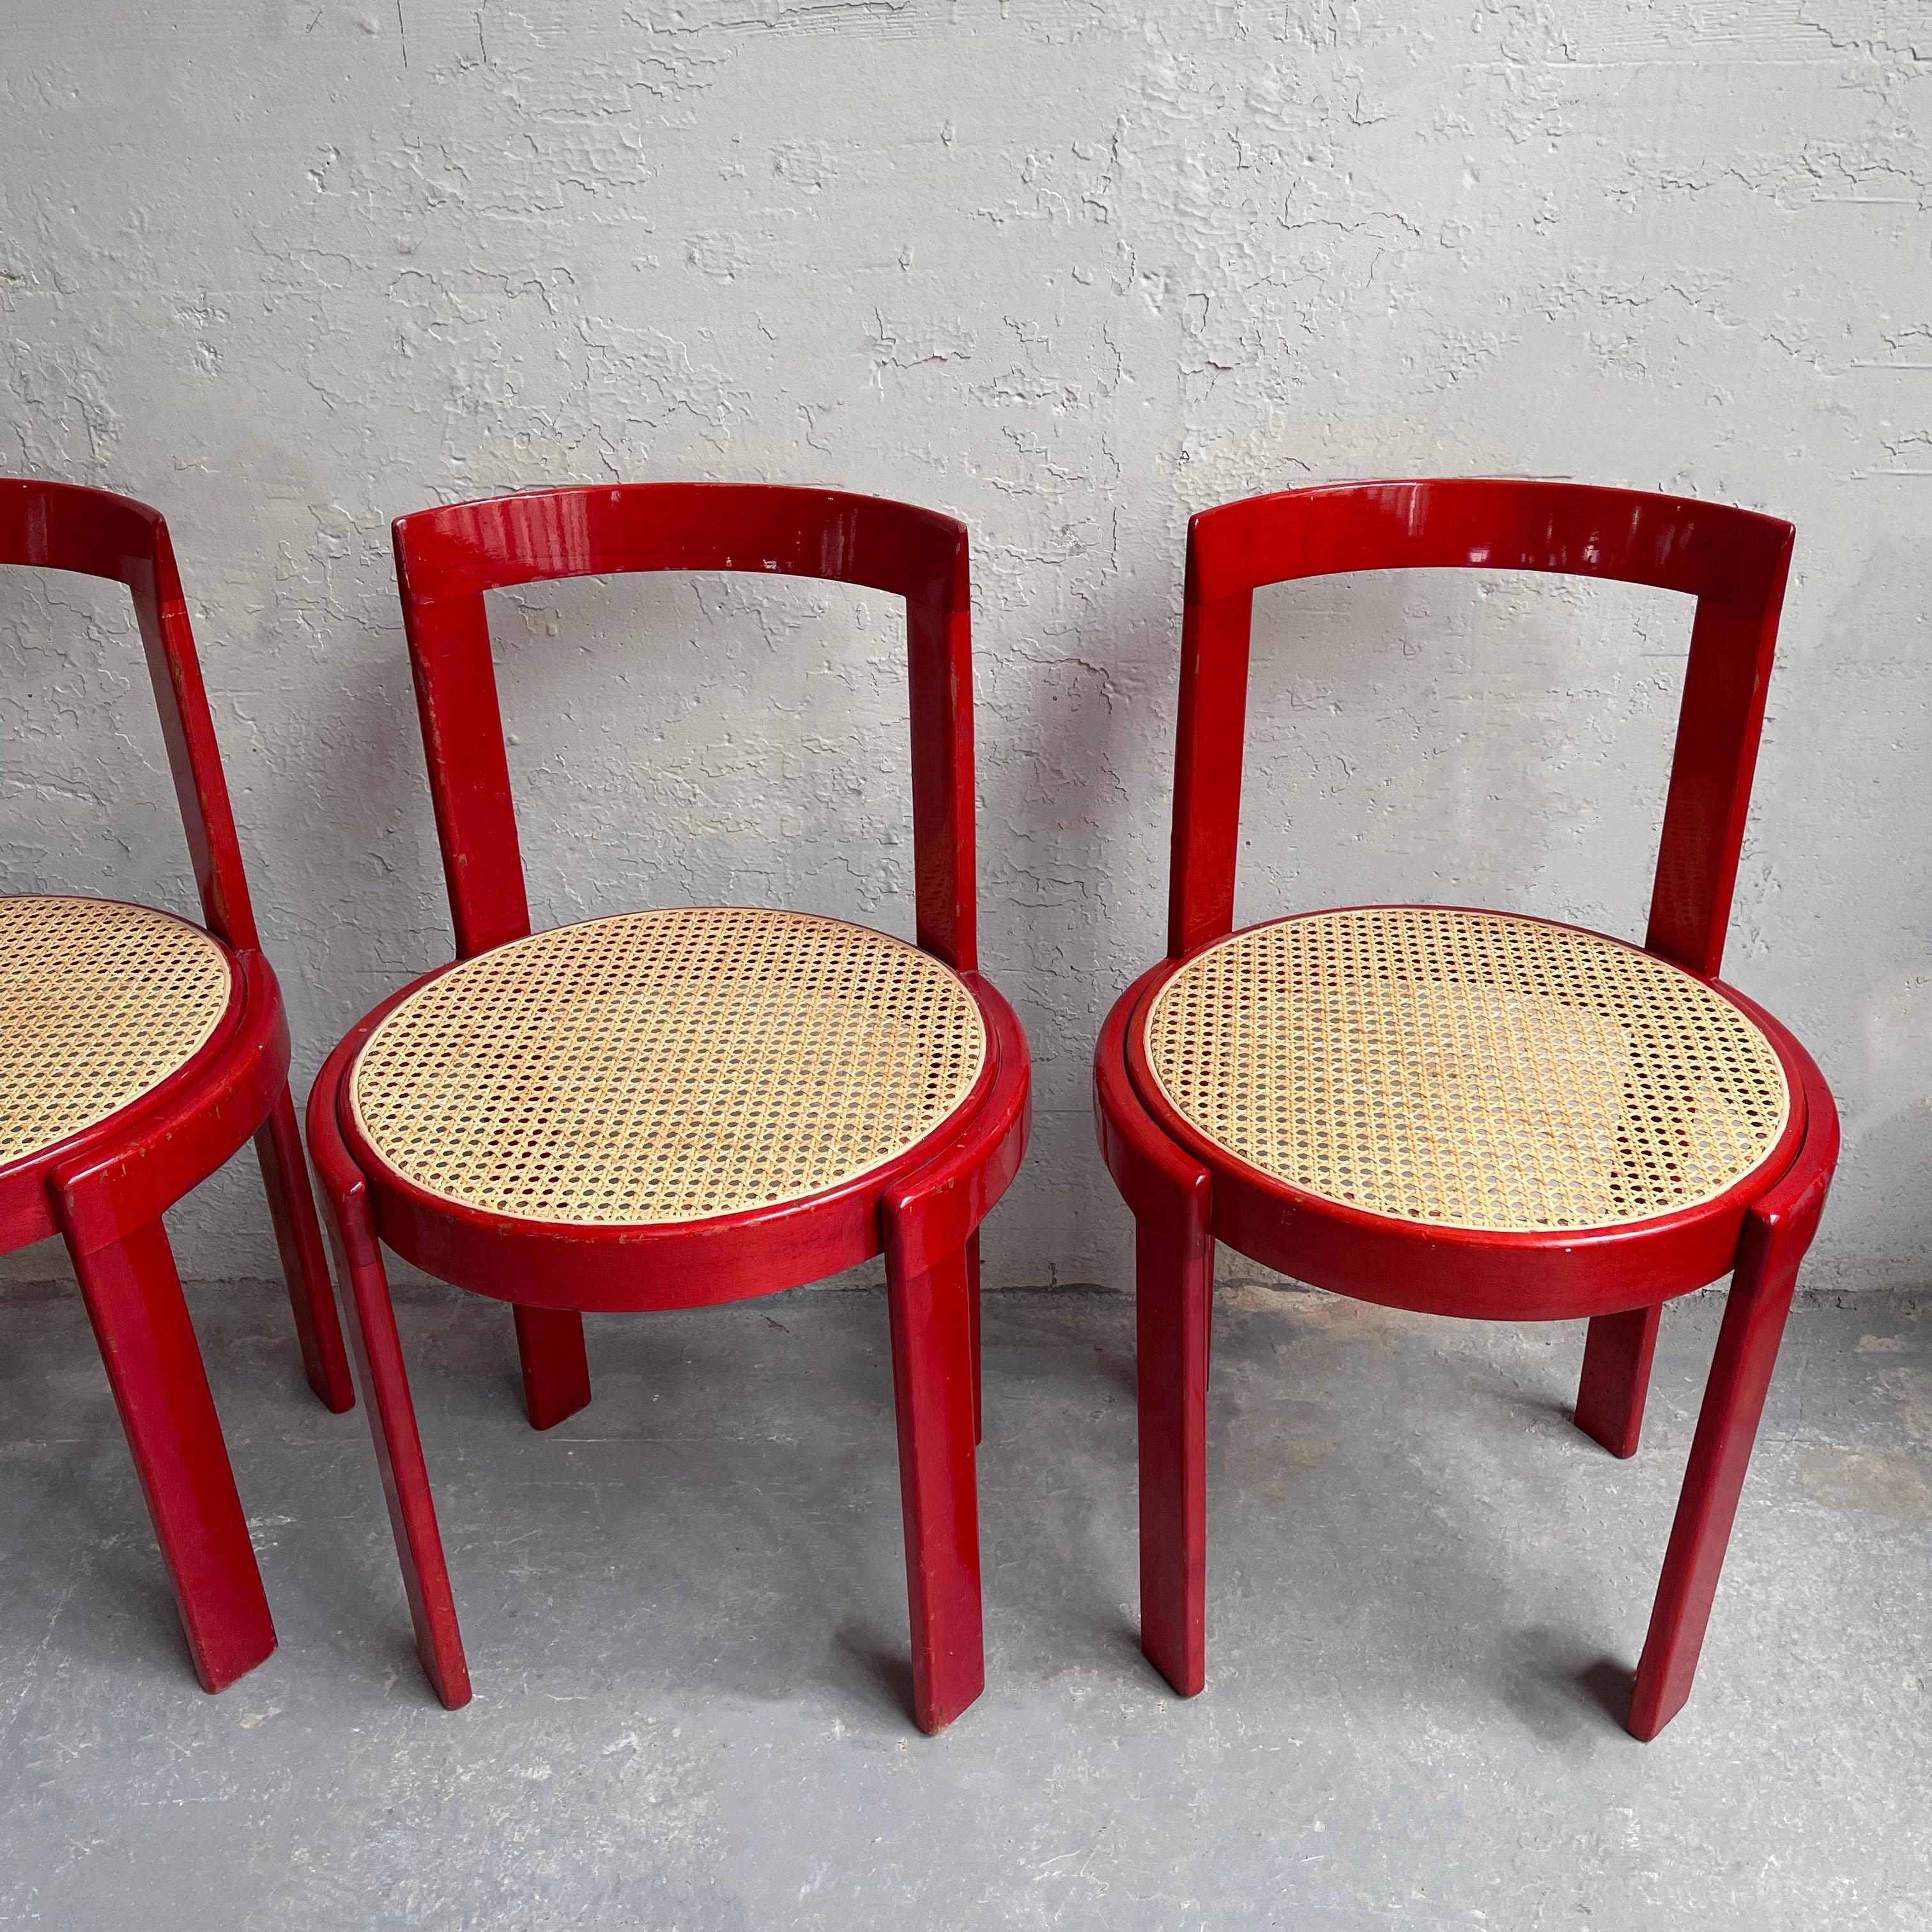 Italian Modernist Circular Bentwood And Cane Dining Chairs Set Of 6 For Sale 3